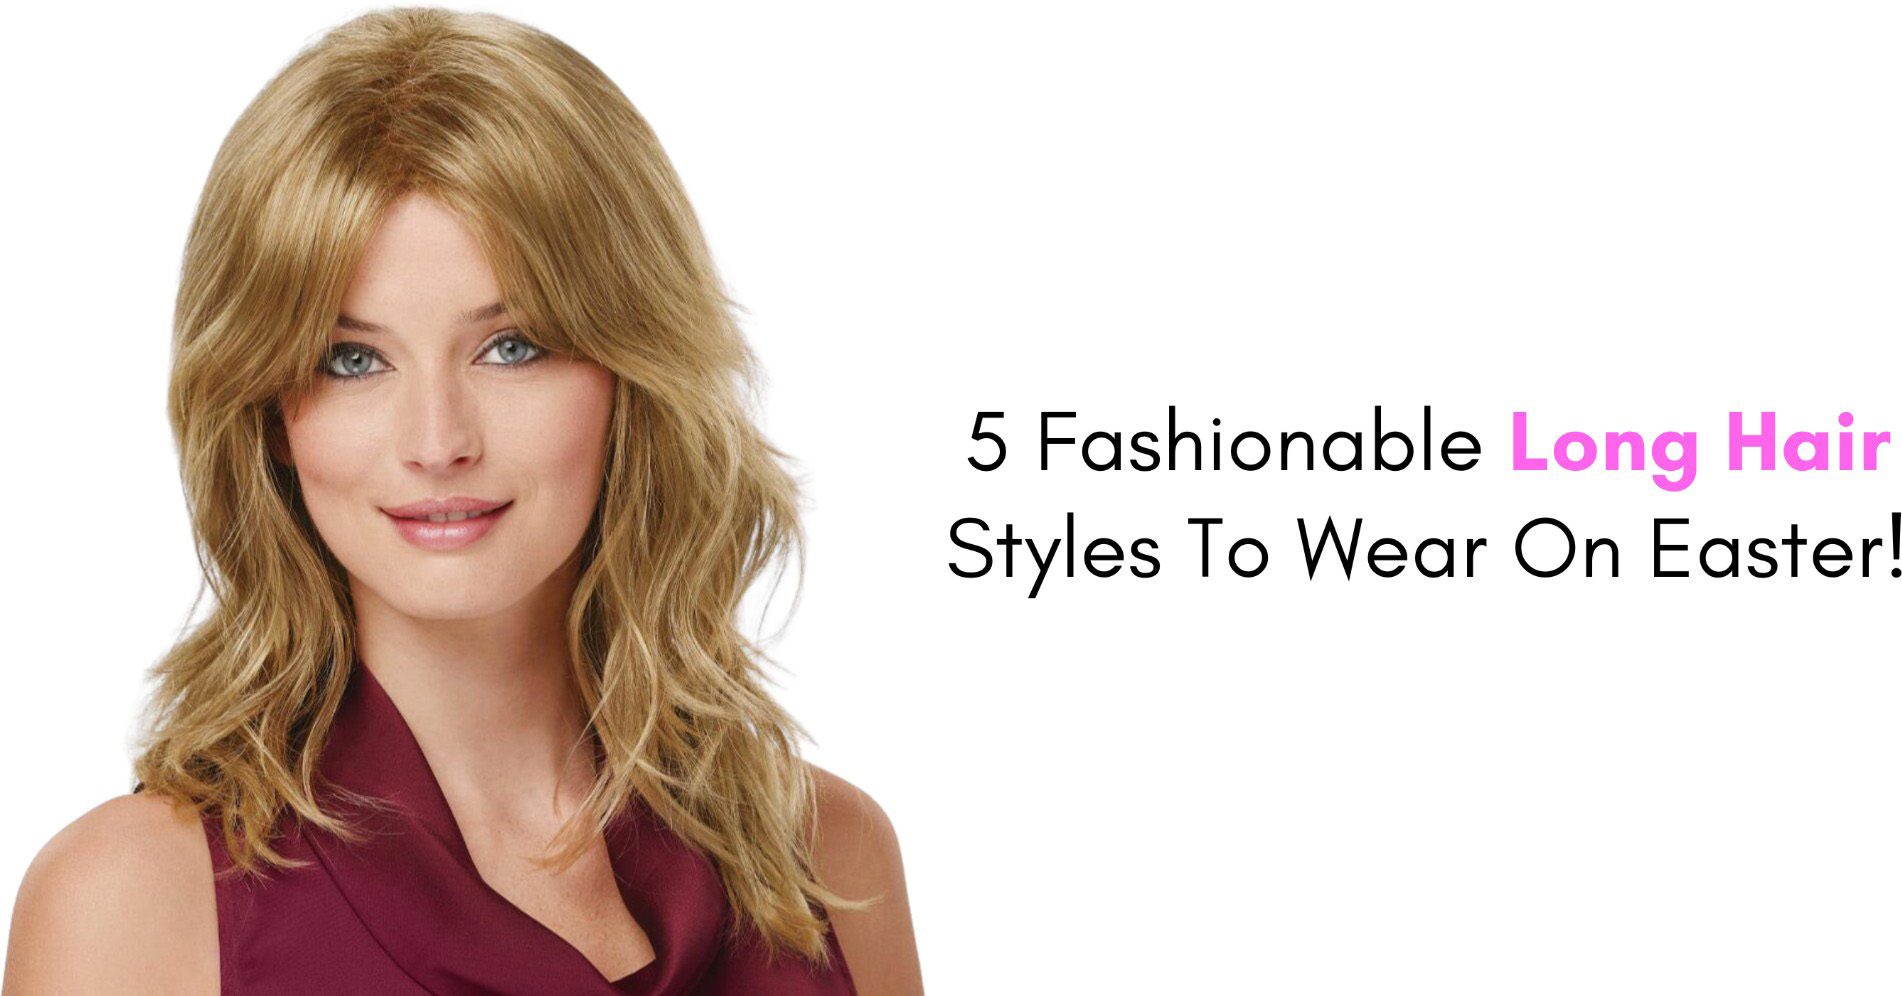 5 fashionable long hair styles to wear on easter